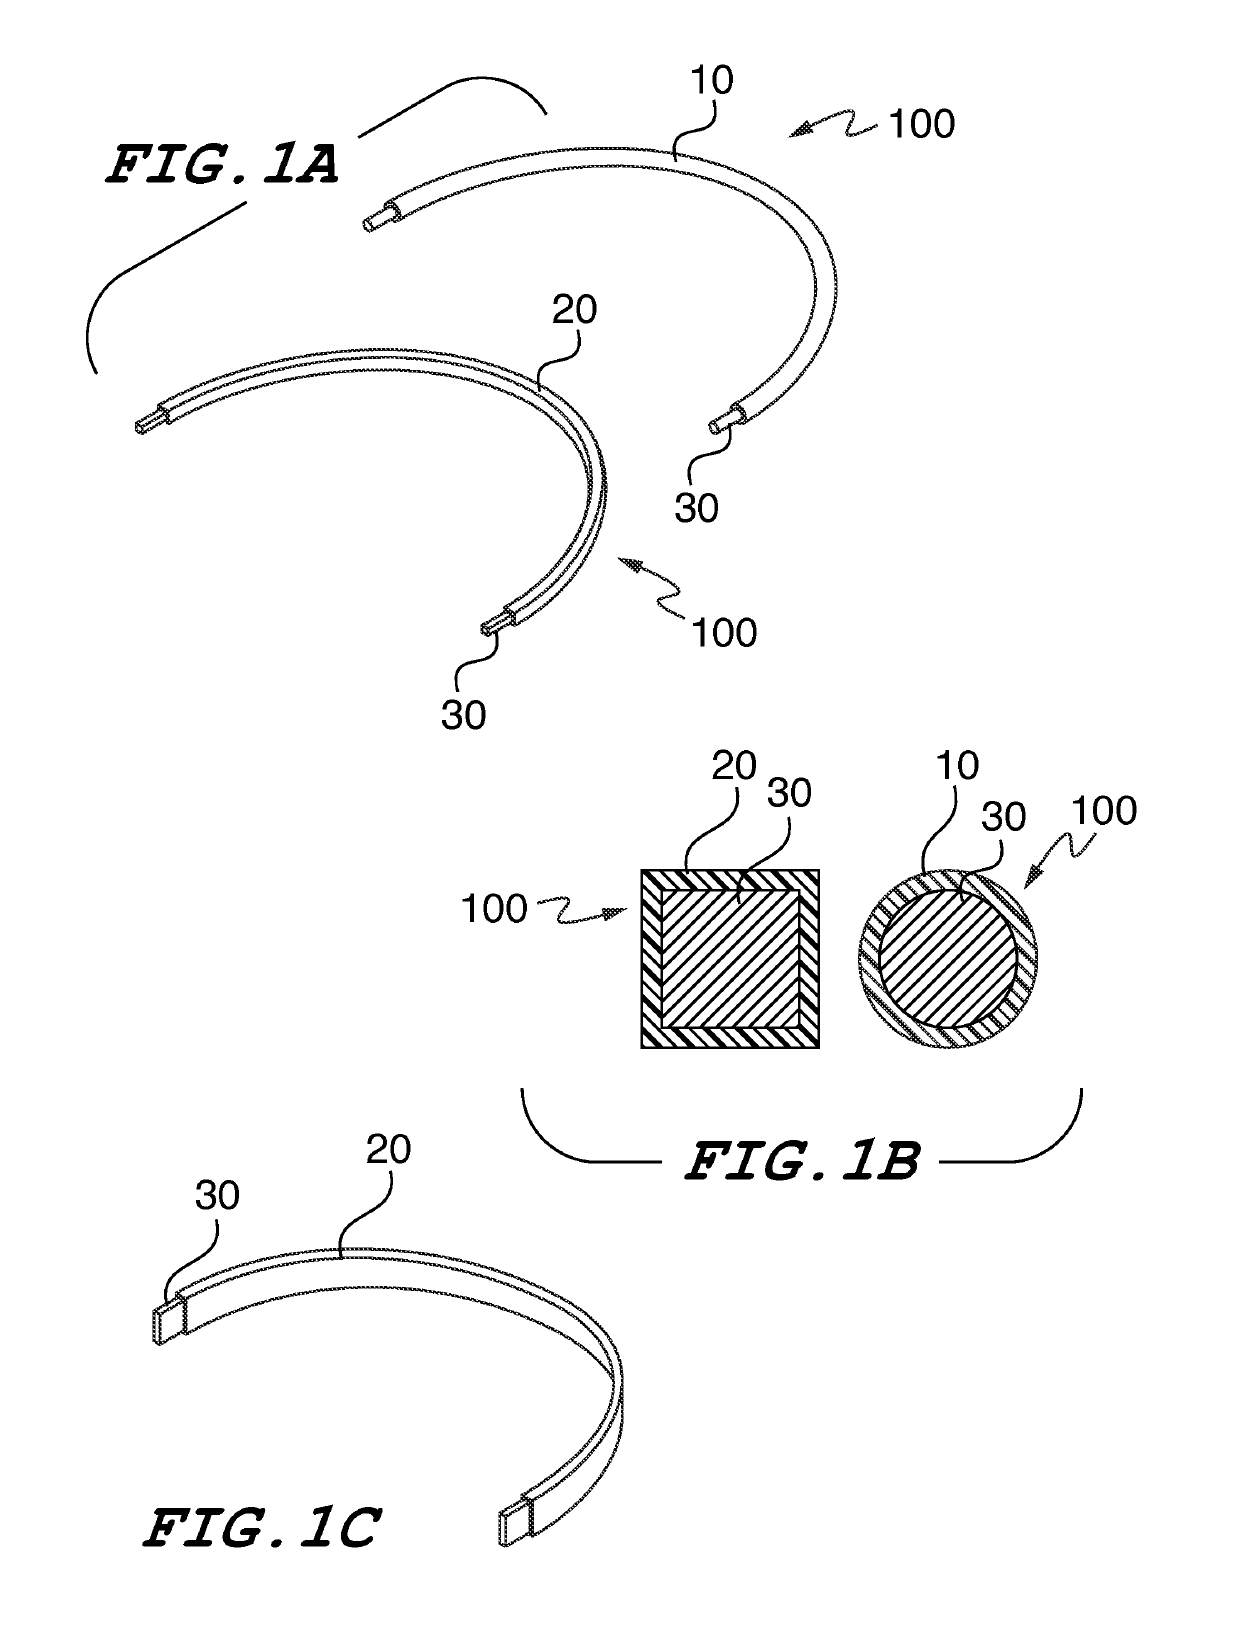 Orthodontic wire alignment system and method